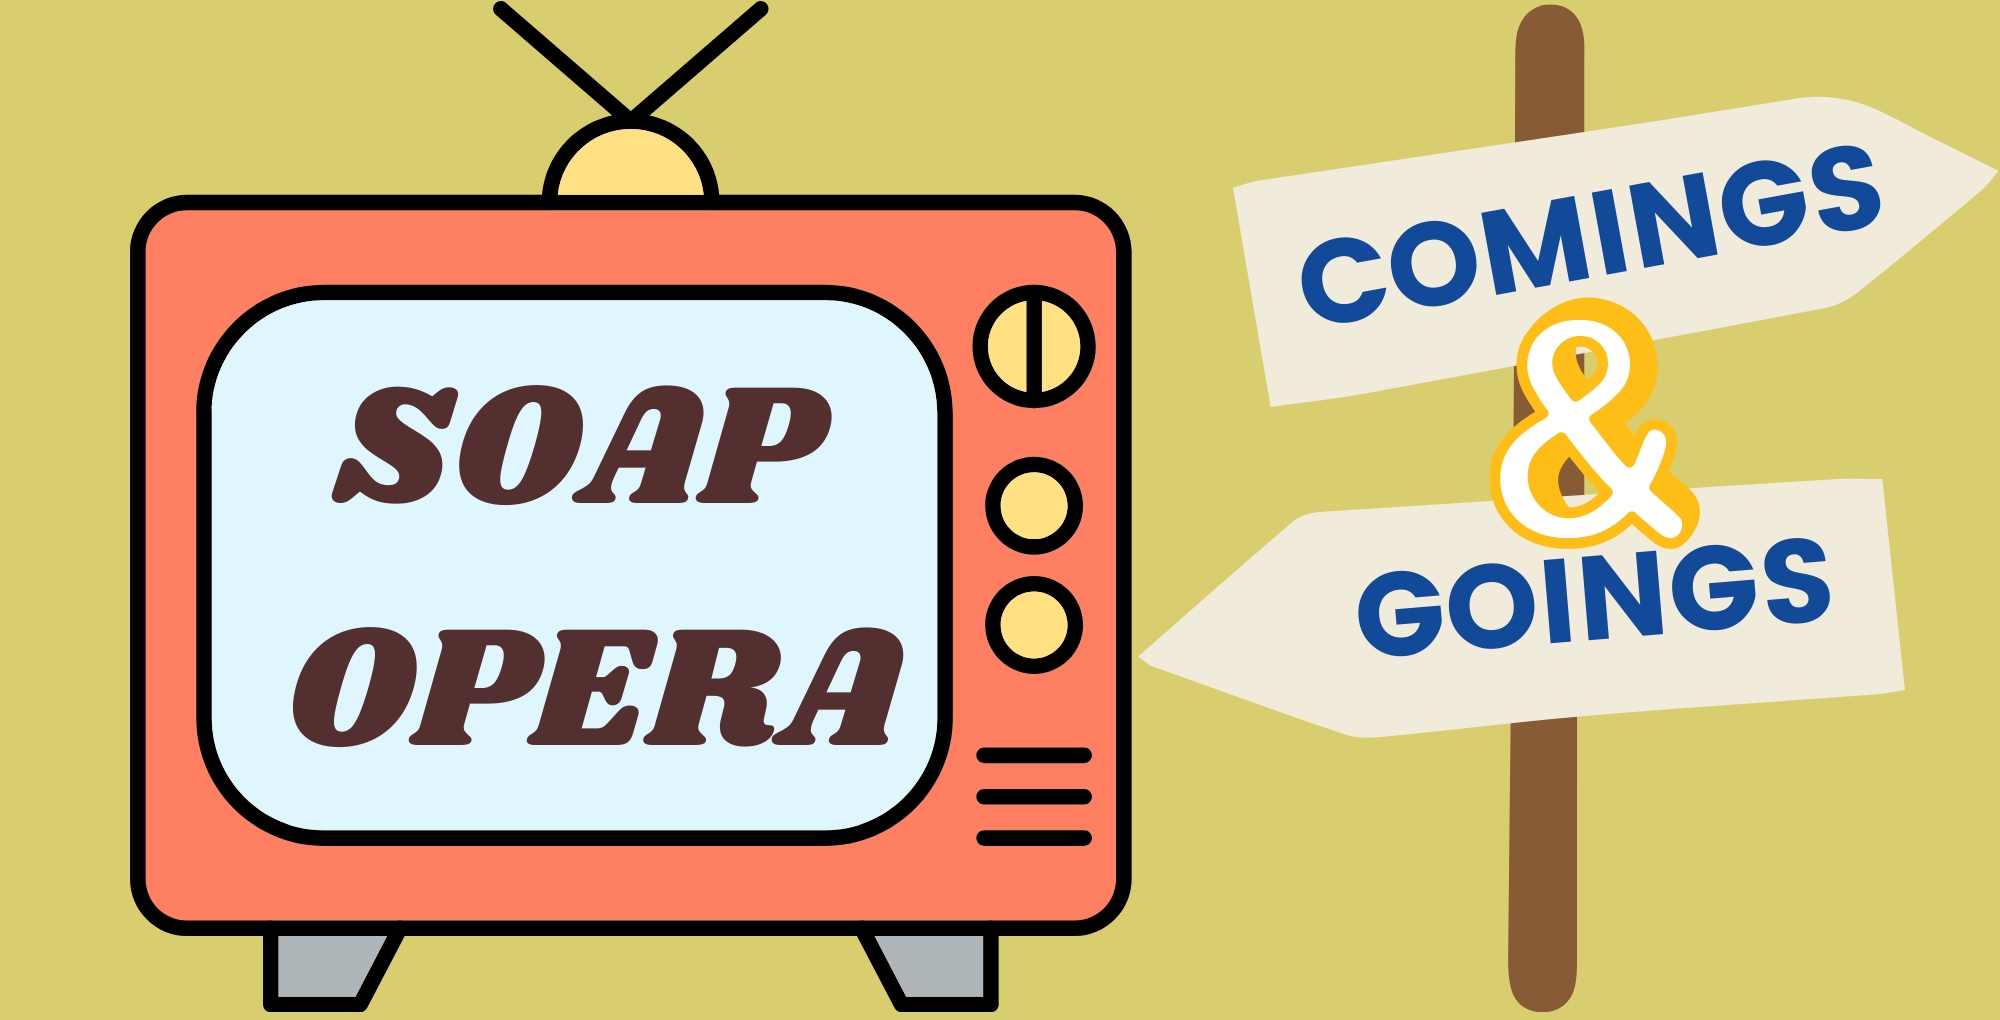 soap opera comings and goings february 26.